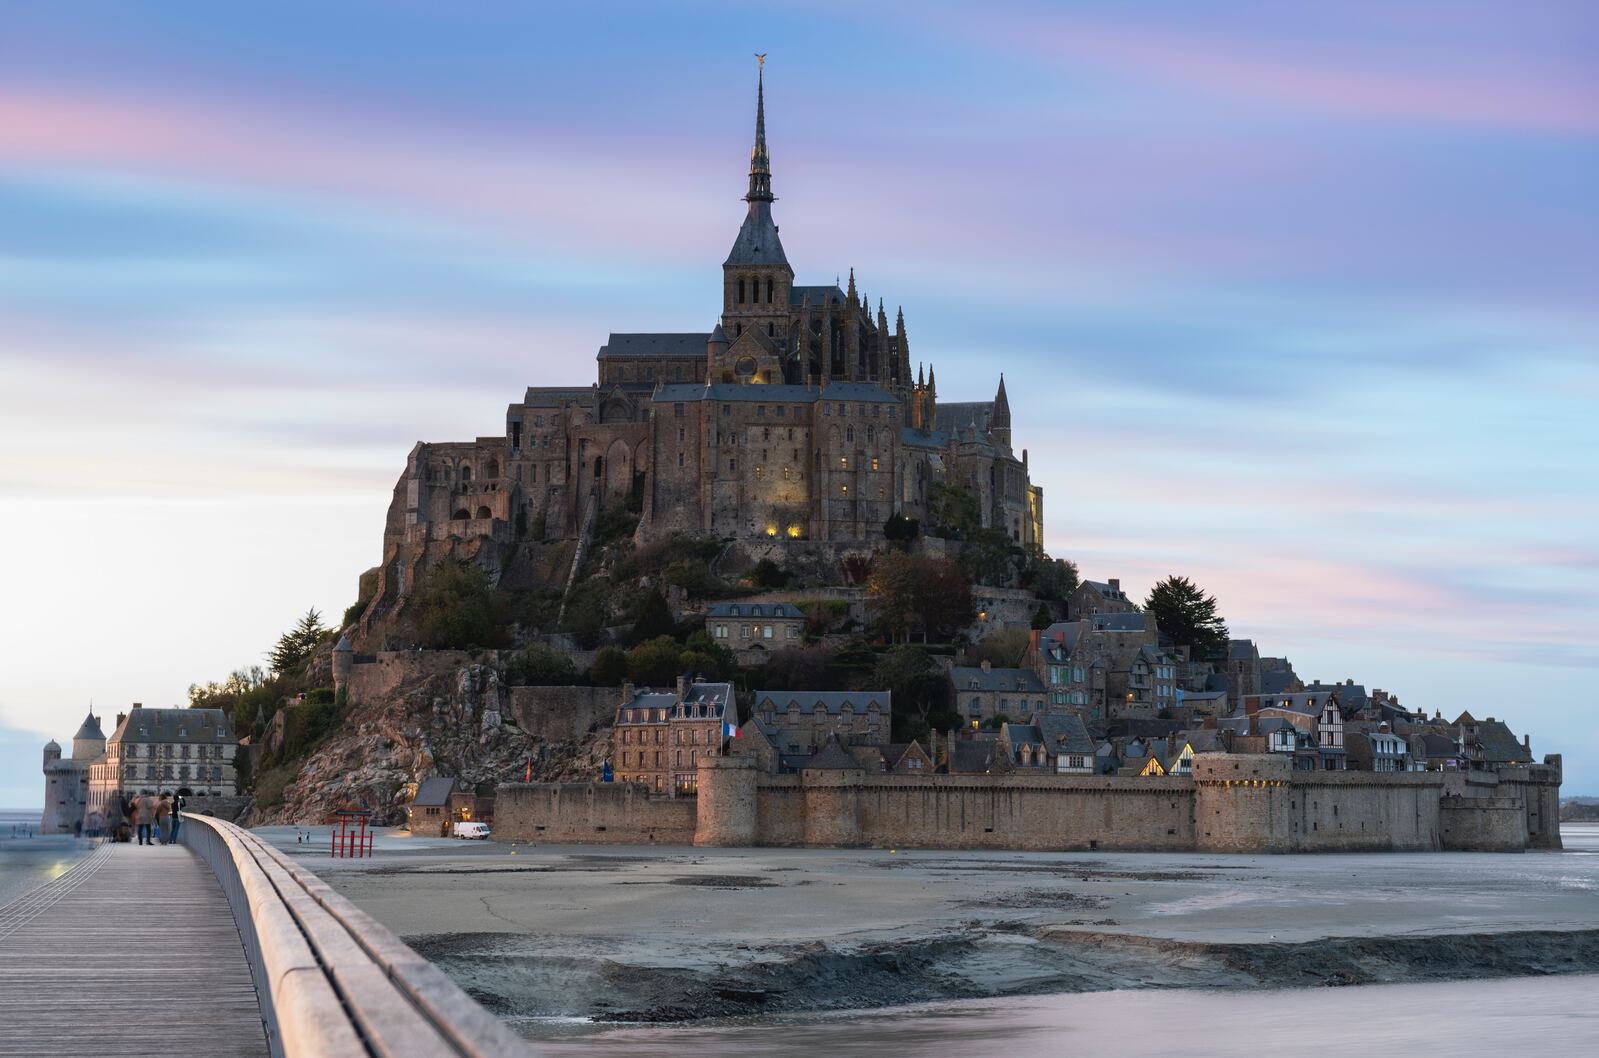 Image of Mont Saint-Michel from the Causeway  by Team PhotoHound